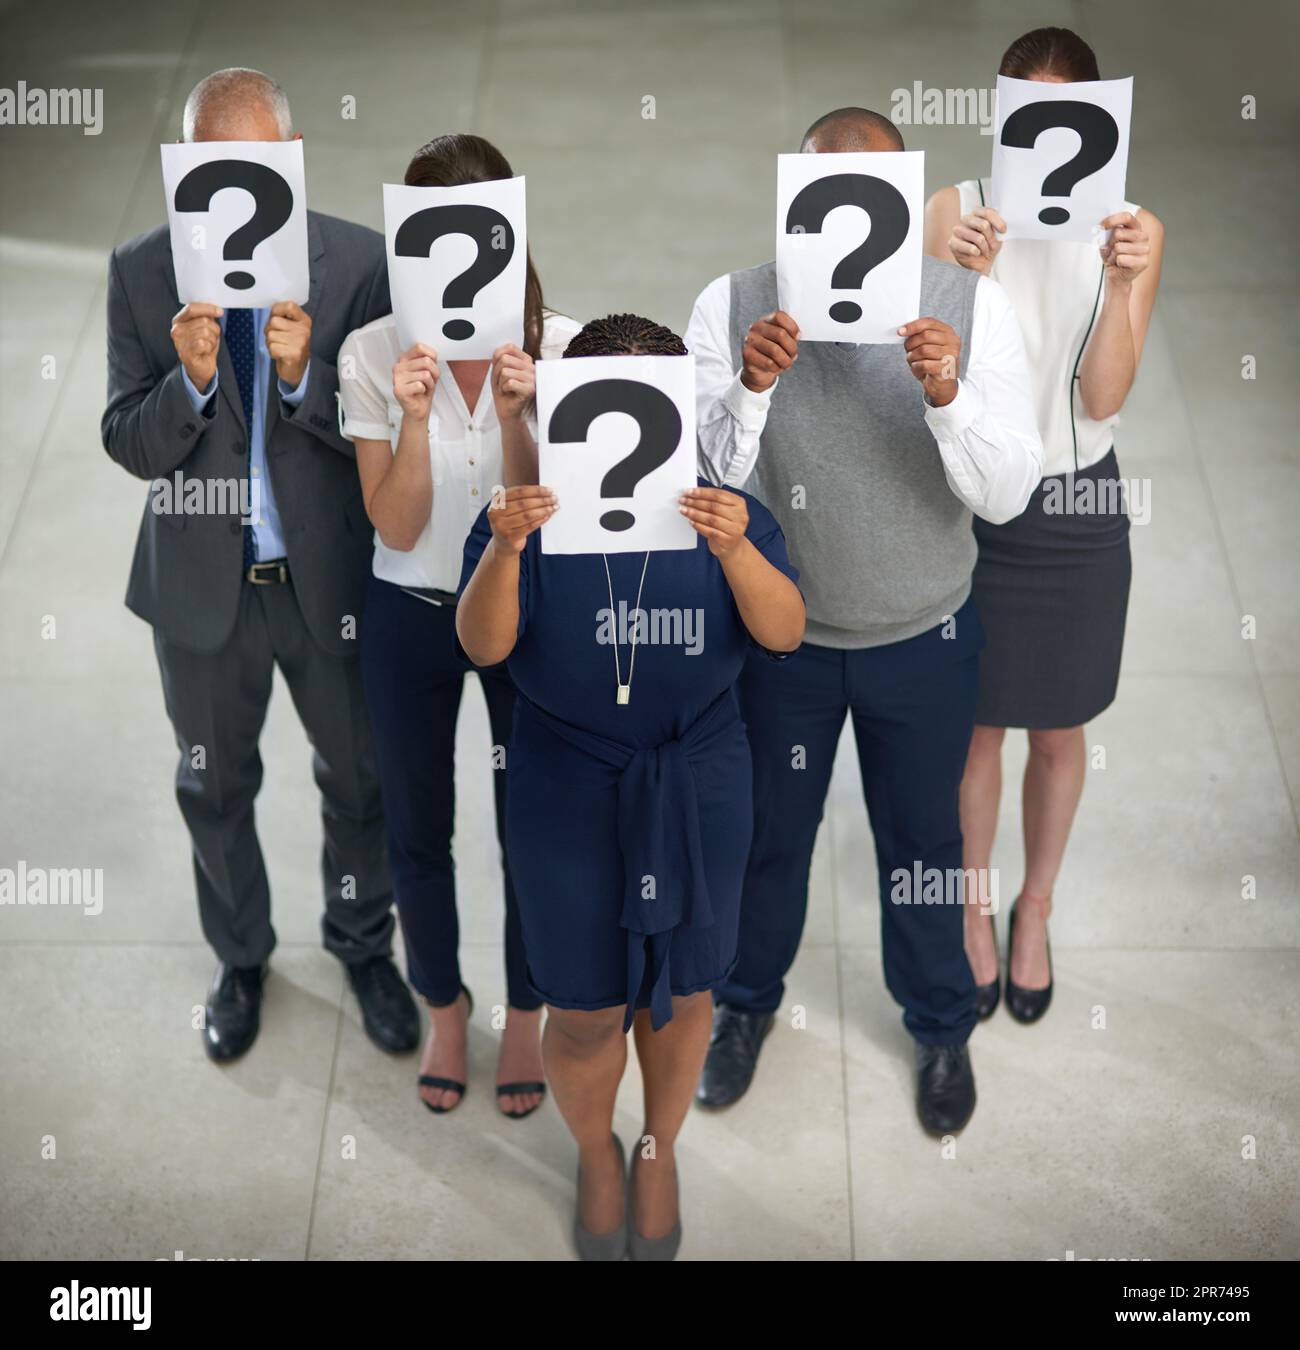 The secretive side of business. High angle shot of a group of businesspeople holding questions marks in front of their faces. Stock Photo